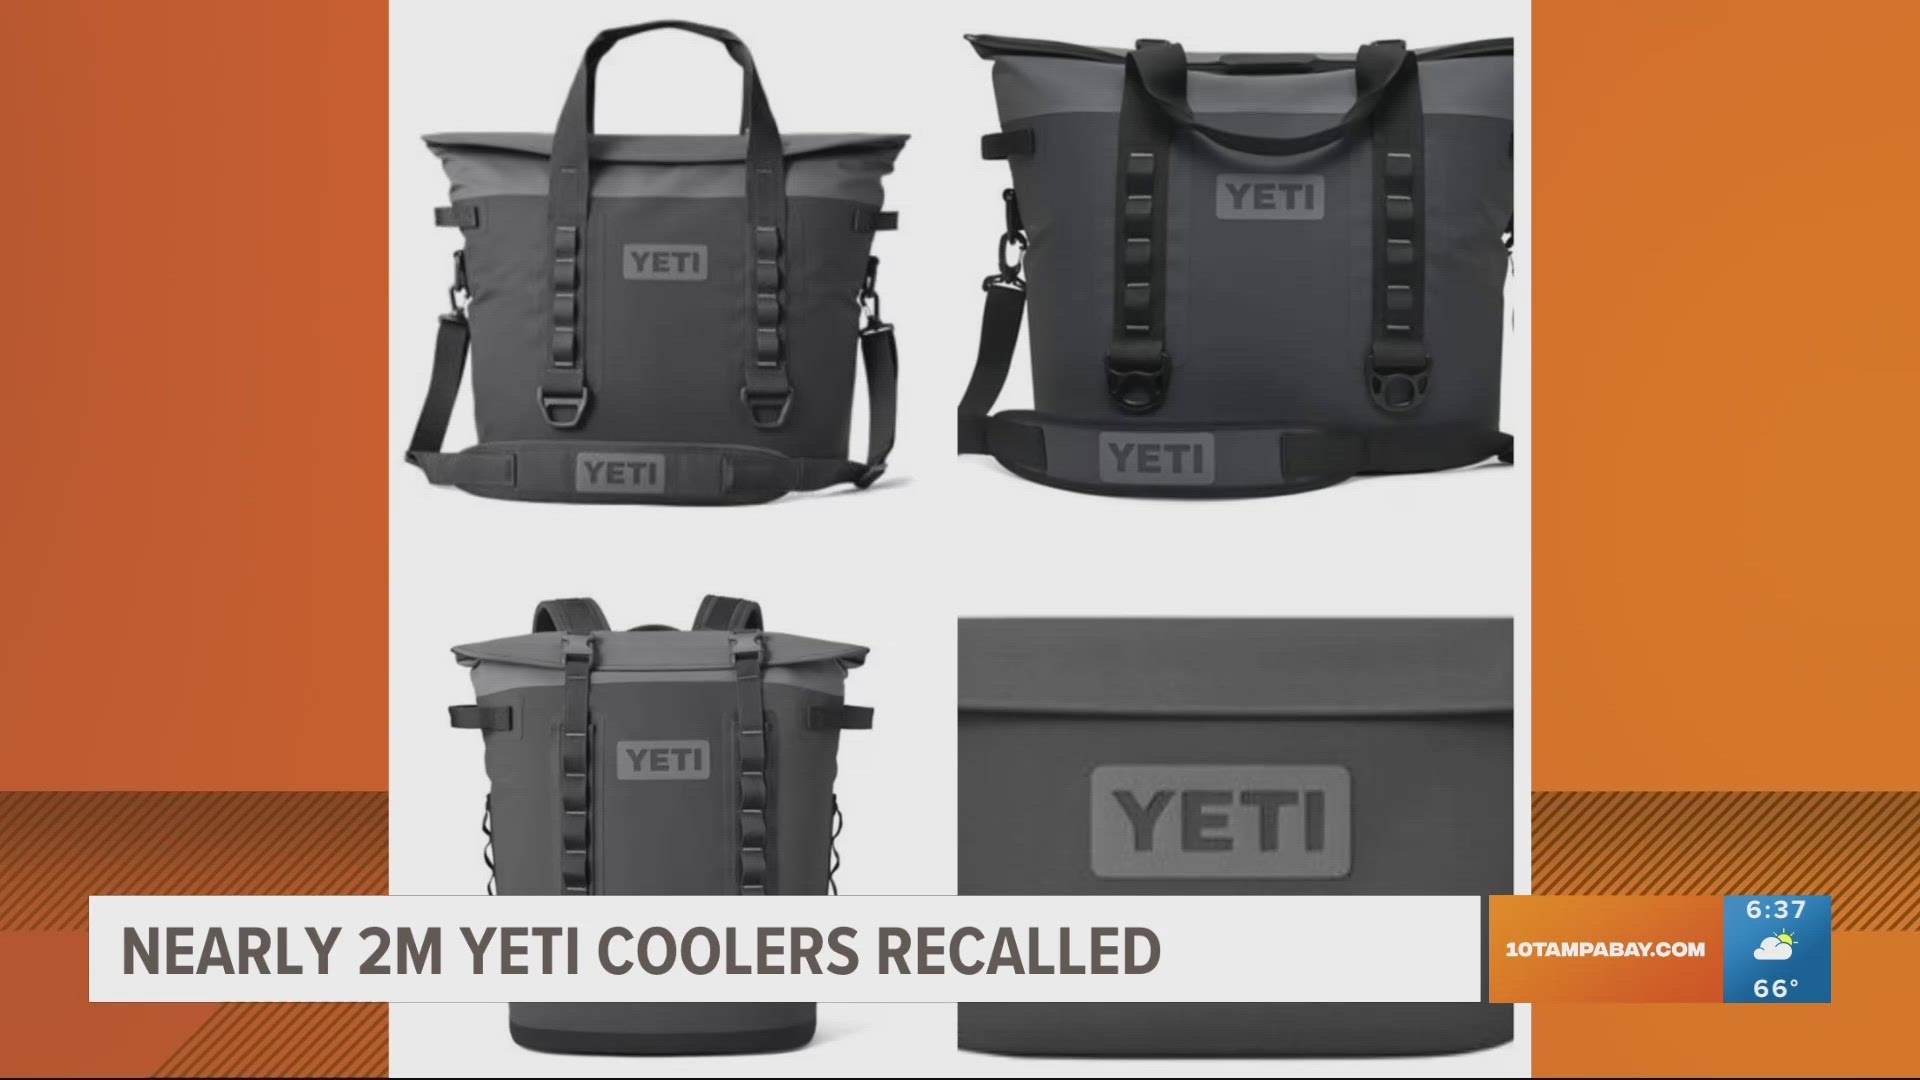 Yeti recalls 1.9 million coolers and gear cases due to magnet